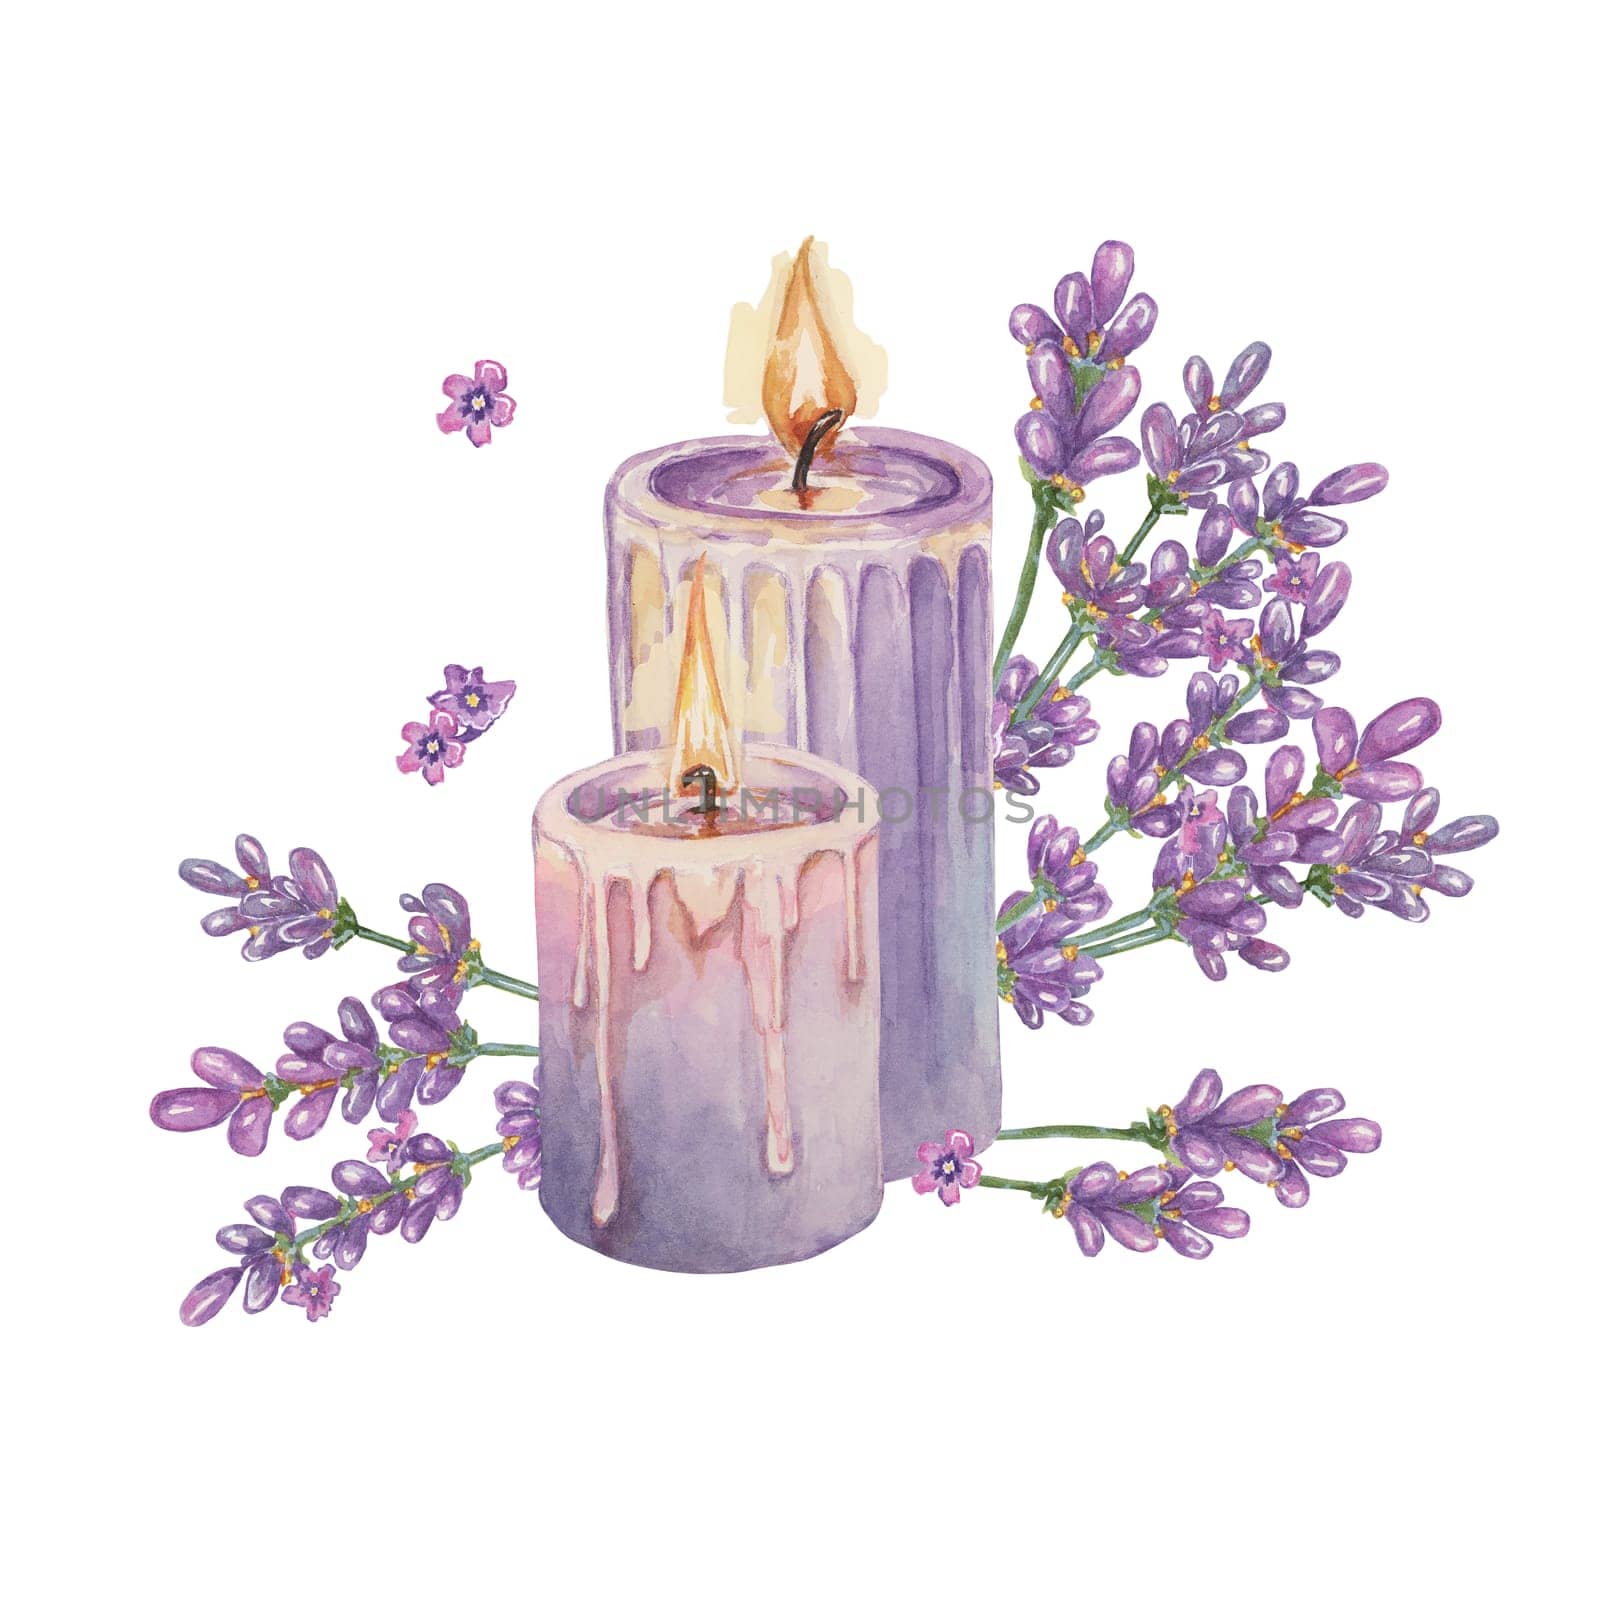 Lavender and lilac wax candles for home fragrance. Home spa aromatherapy relaxing watercolor illustration. Hand drawn clipart for beauty, cosmetics, labels, organic products, wellness and packaging